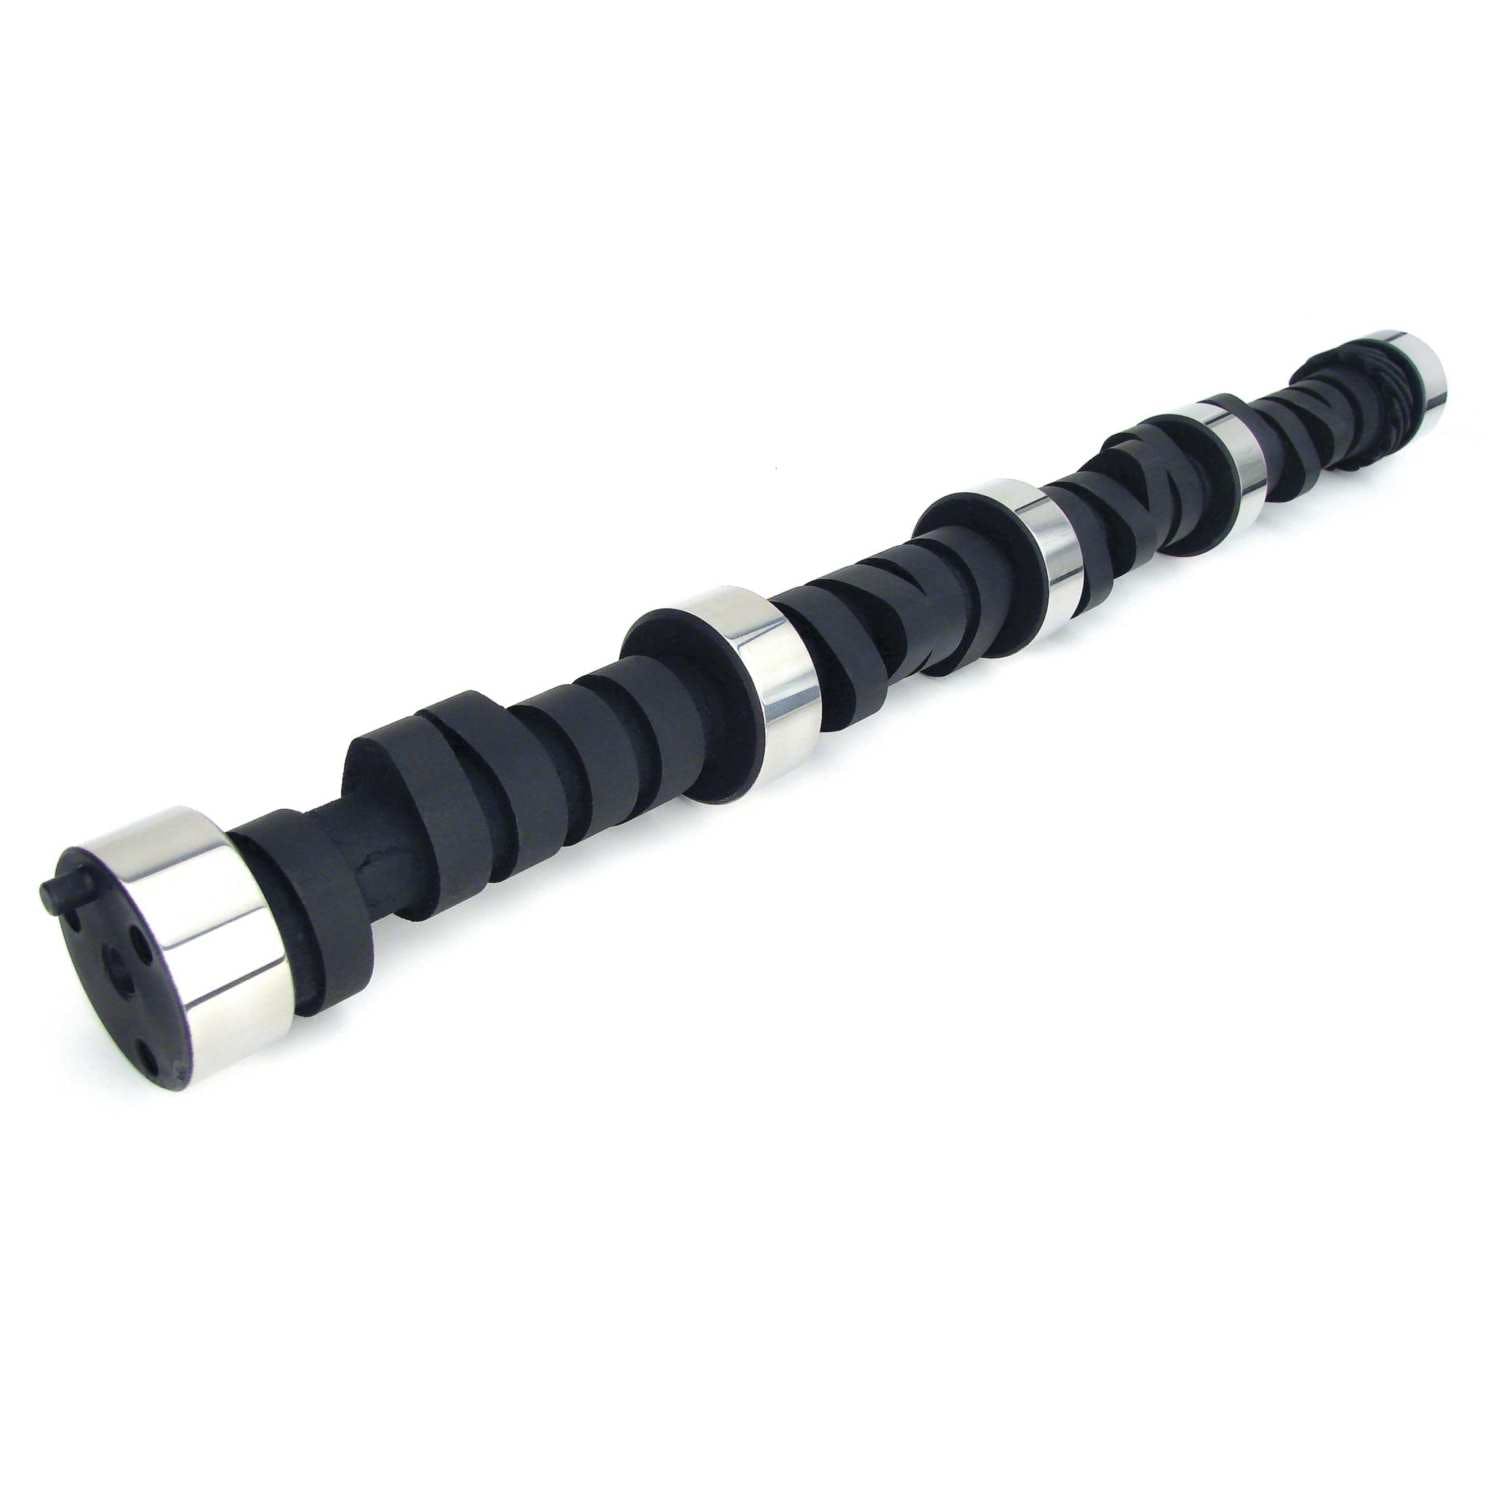 Competition Cams 11-601-4 Mutha Thumpr Camshaft